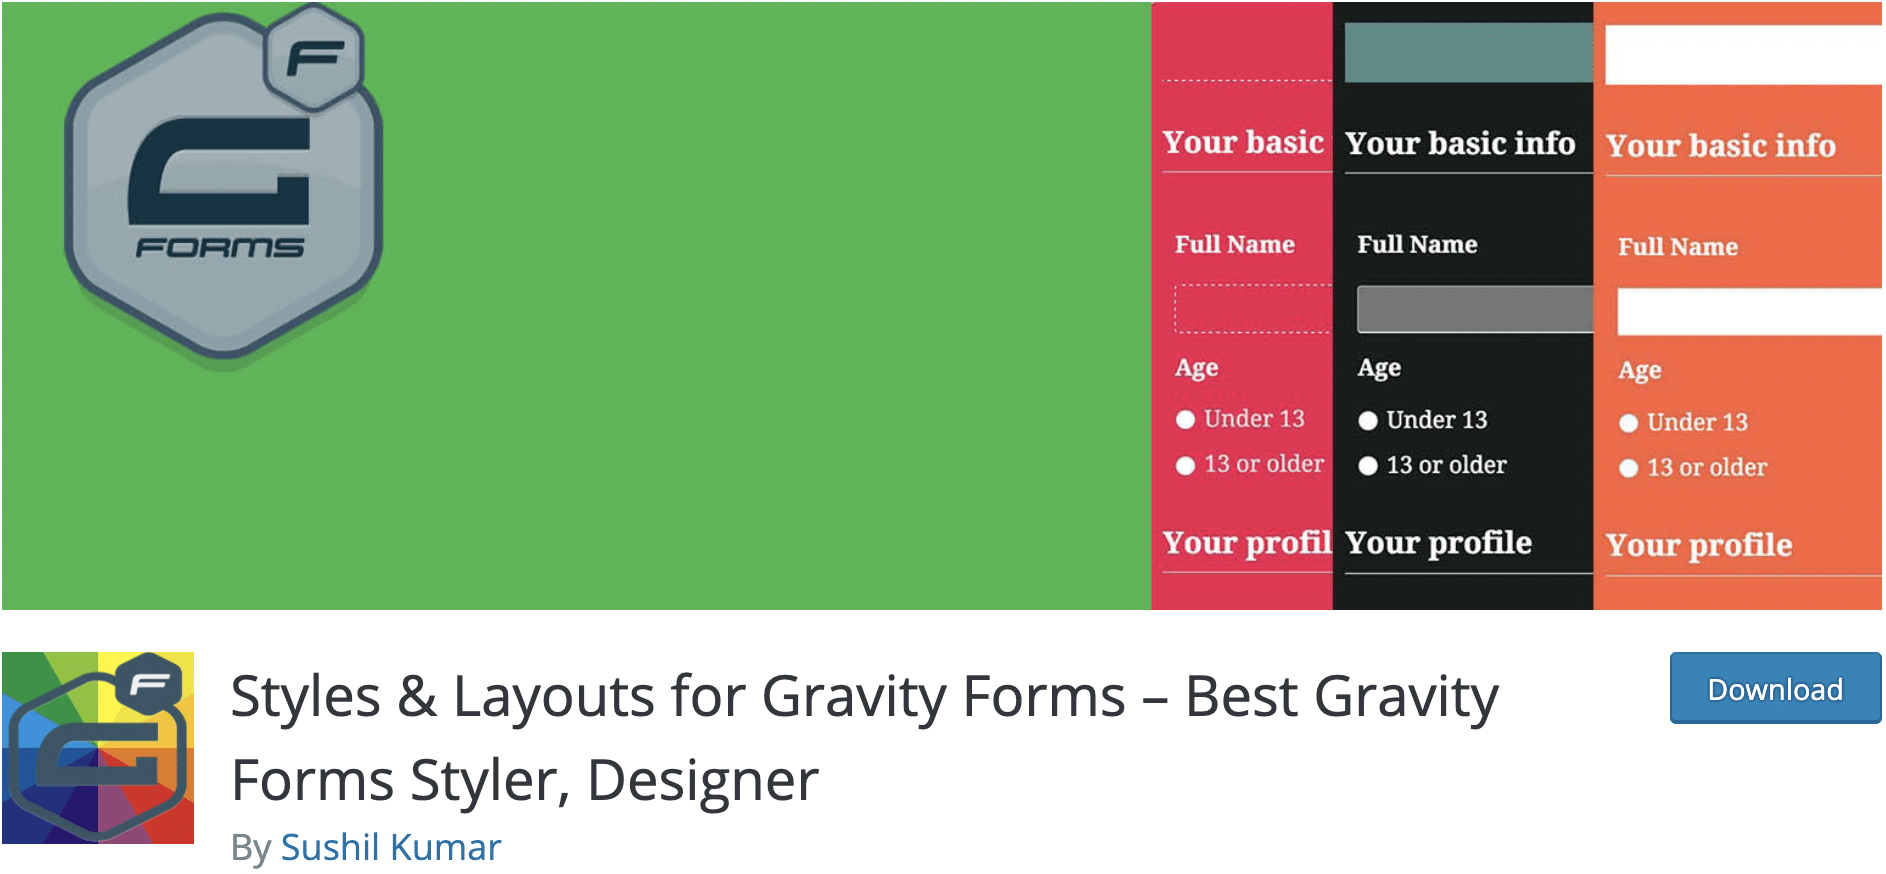 Styles & Layouts for Gravity Forms plugin to download on the WordPress official directory.